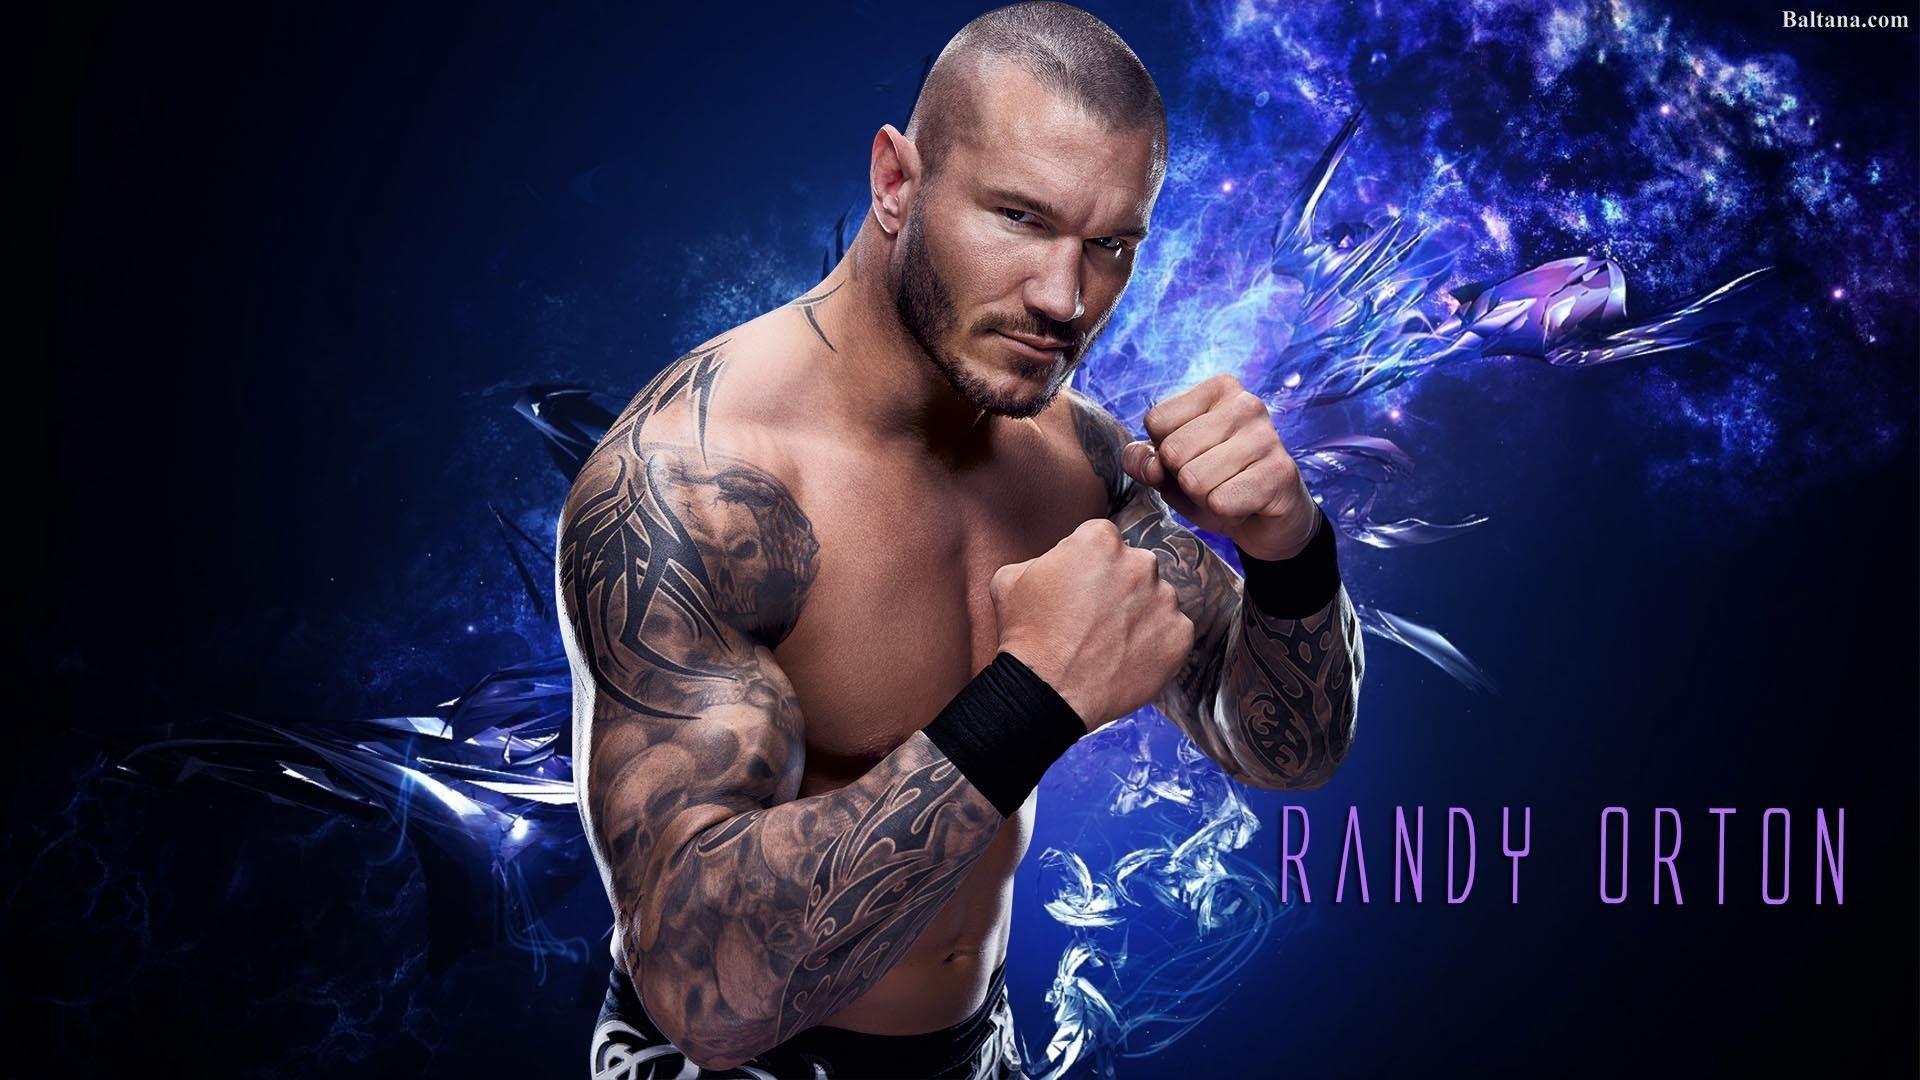 Randy Orton Wallpapers HD Backgrounds, Image, Pics, Photos Free.